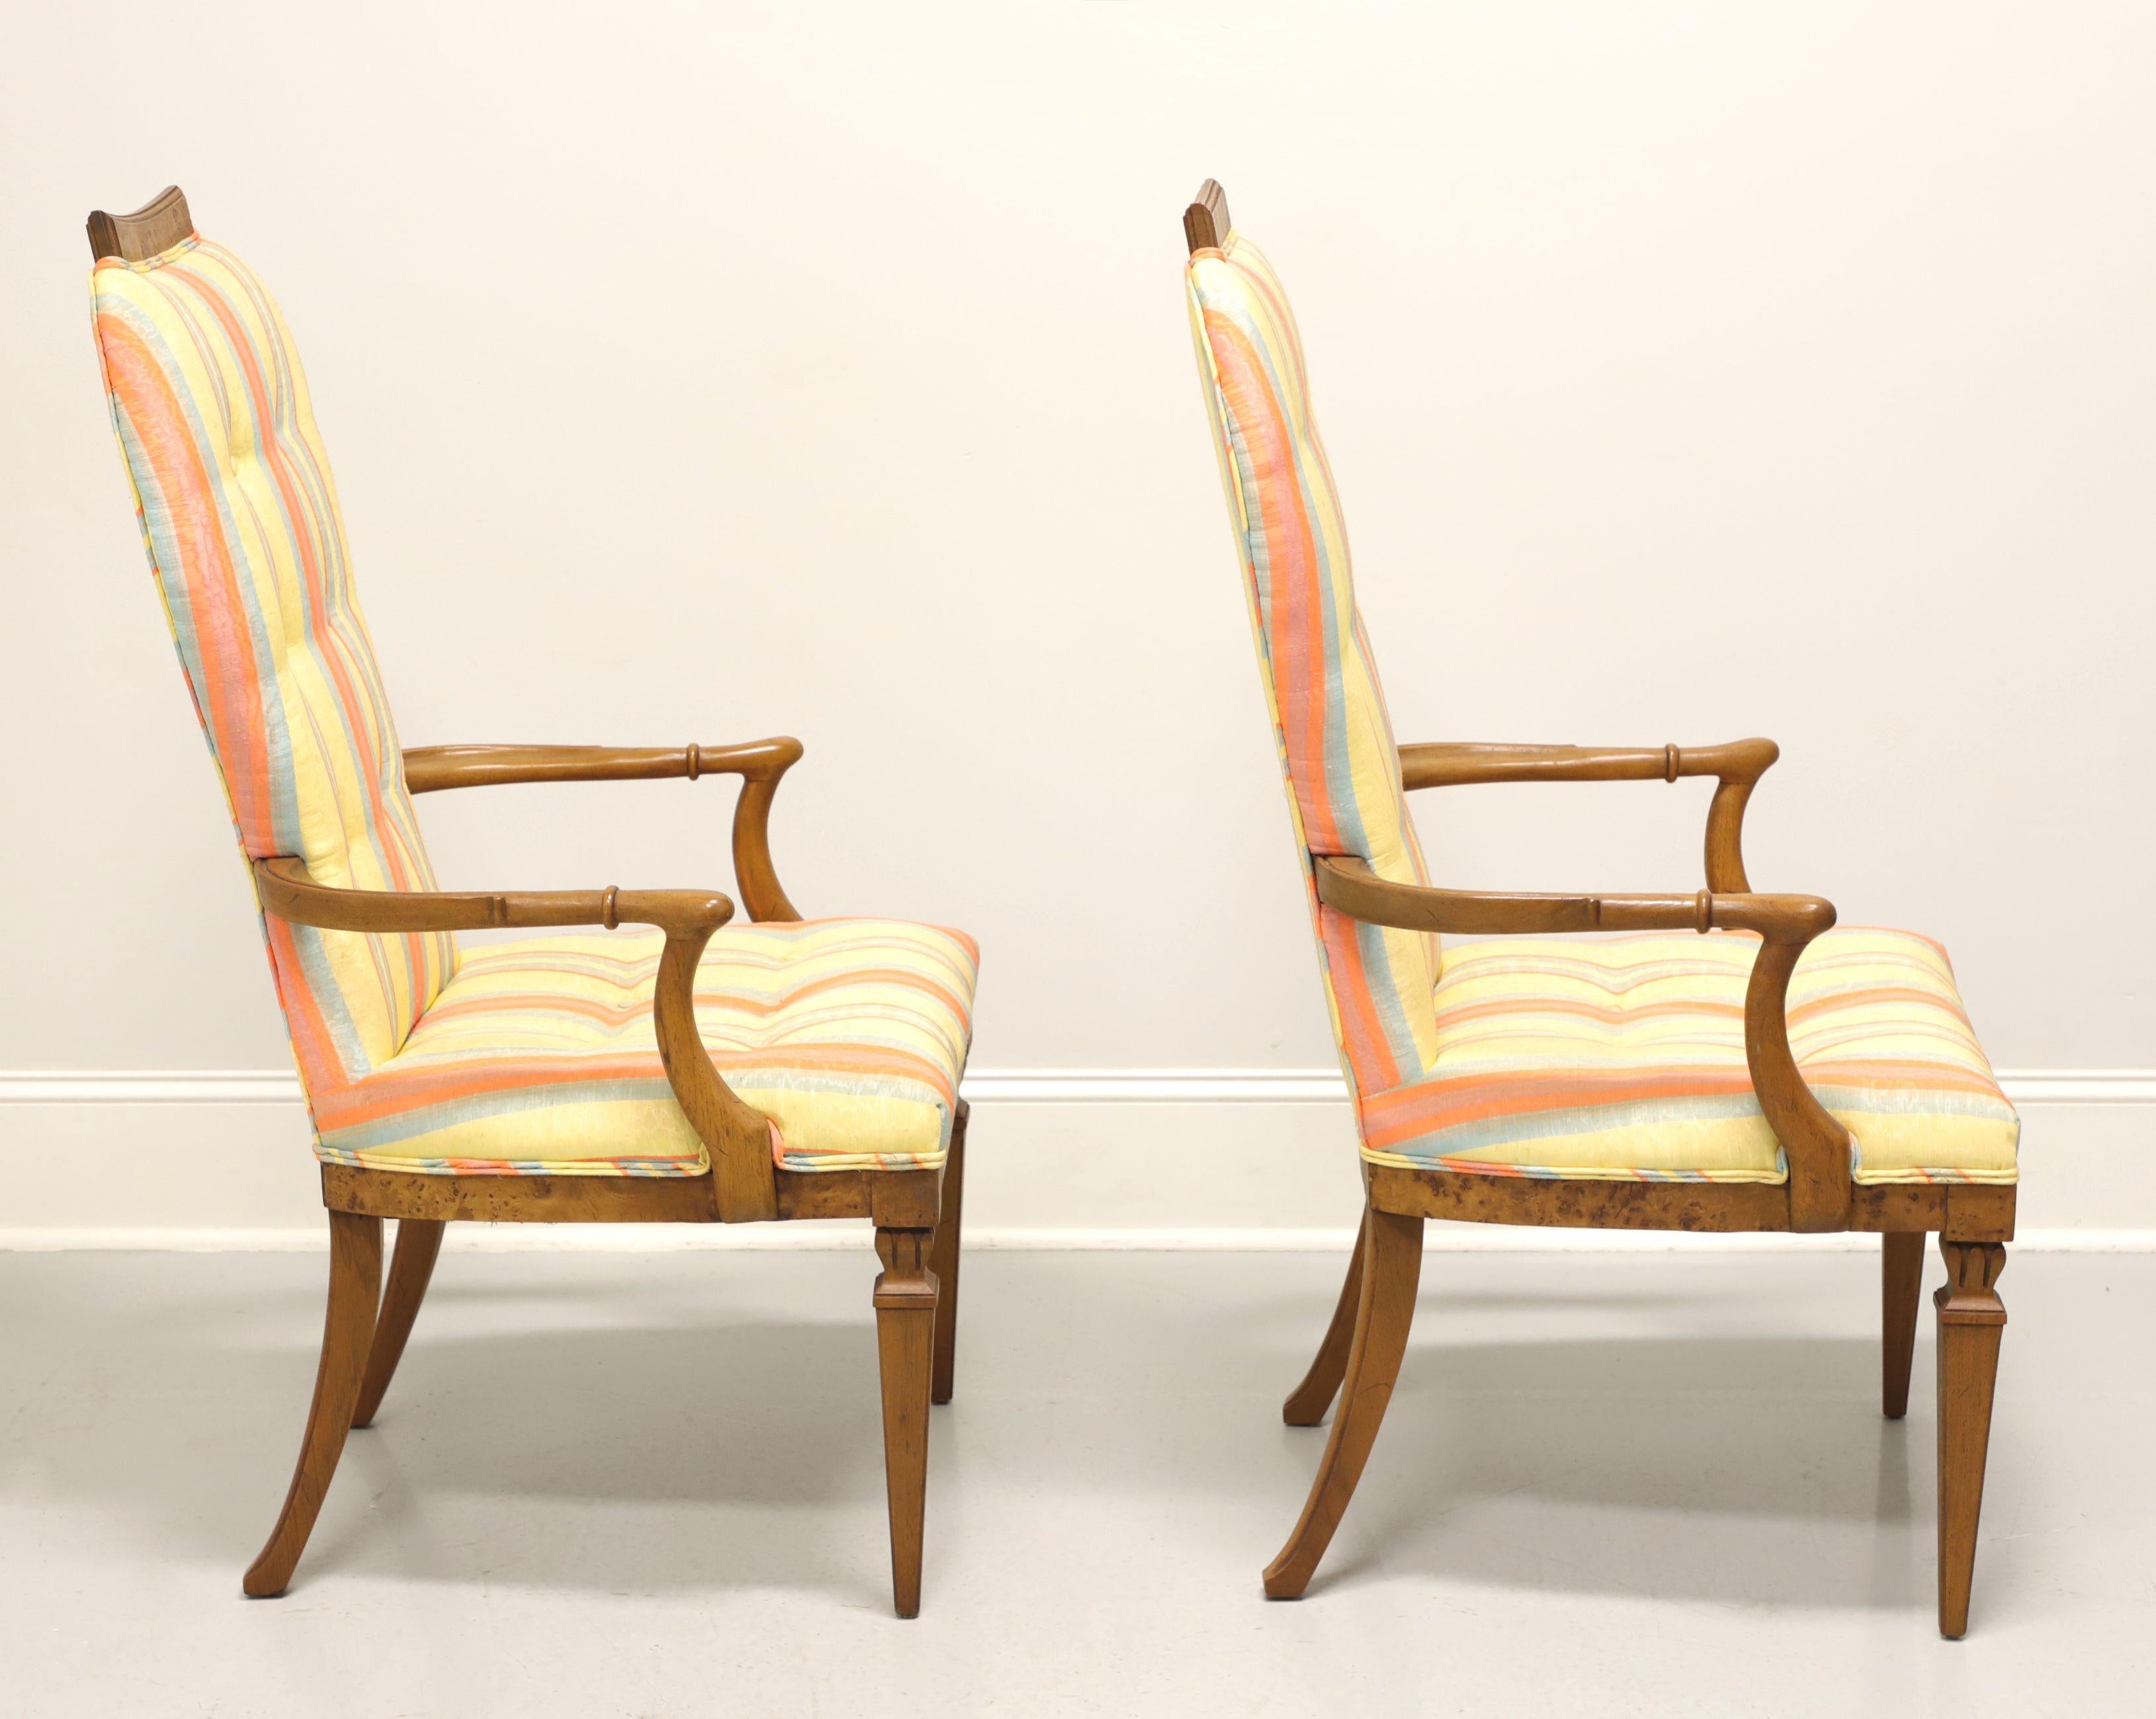 TOMLINSON 1960's Neoclassical Upholstered Dining Armchairs - Pair In Good Condition For Sale In Charlotte, NC